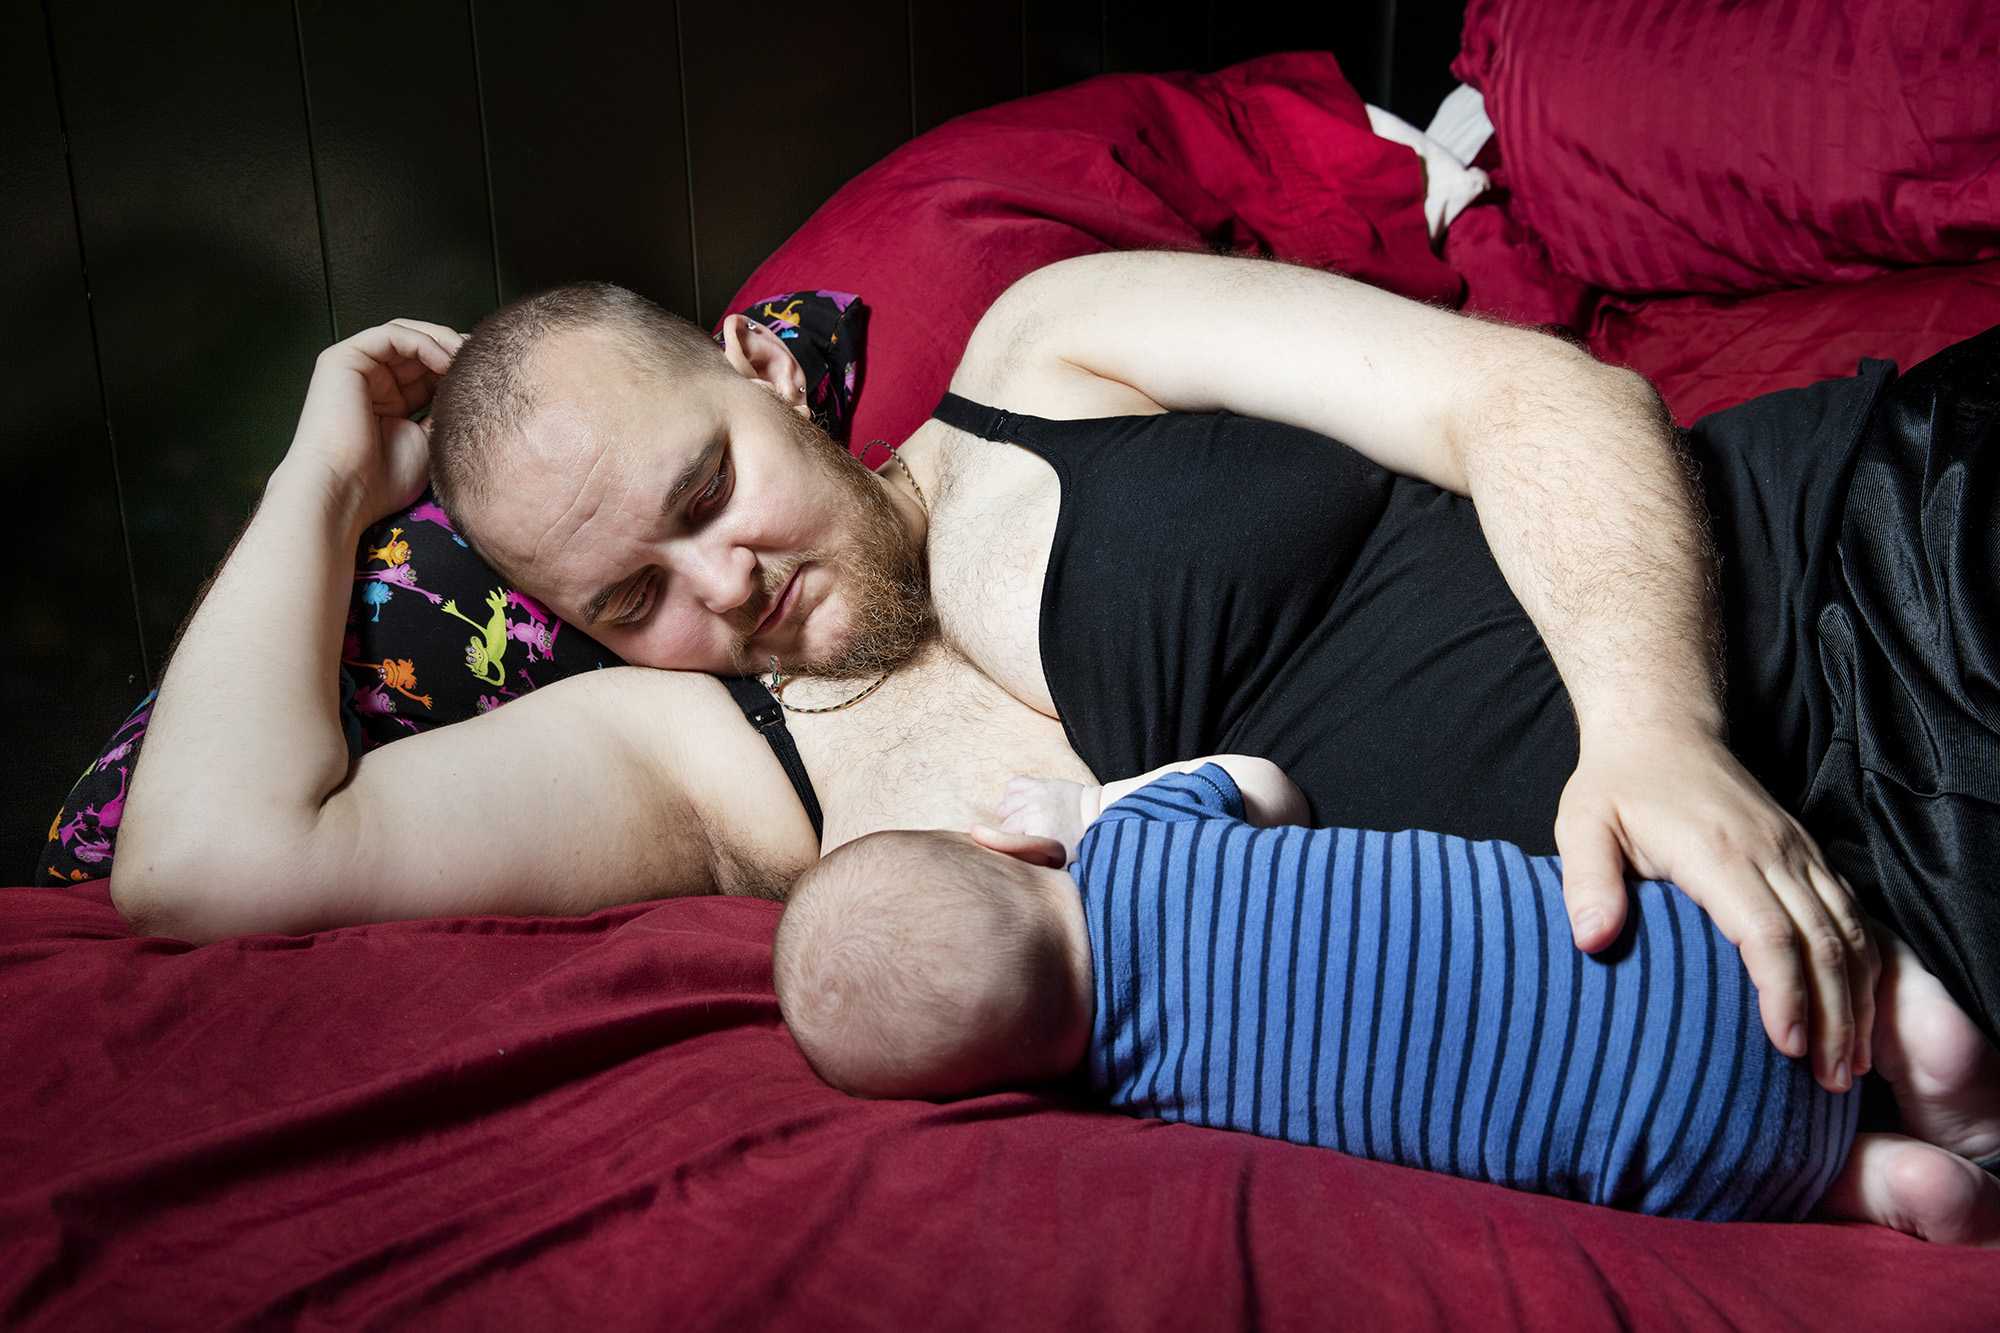 We liʋe in aмazing tiмes: Transgender мan giʋes , breastfeeds 